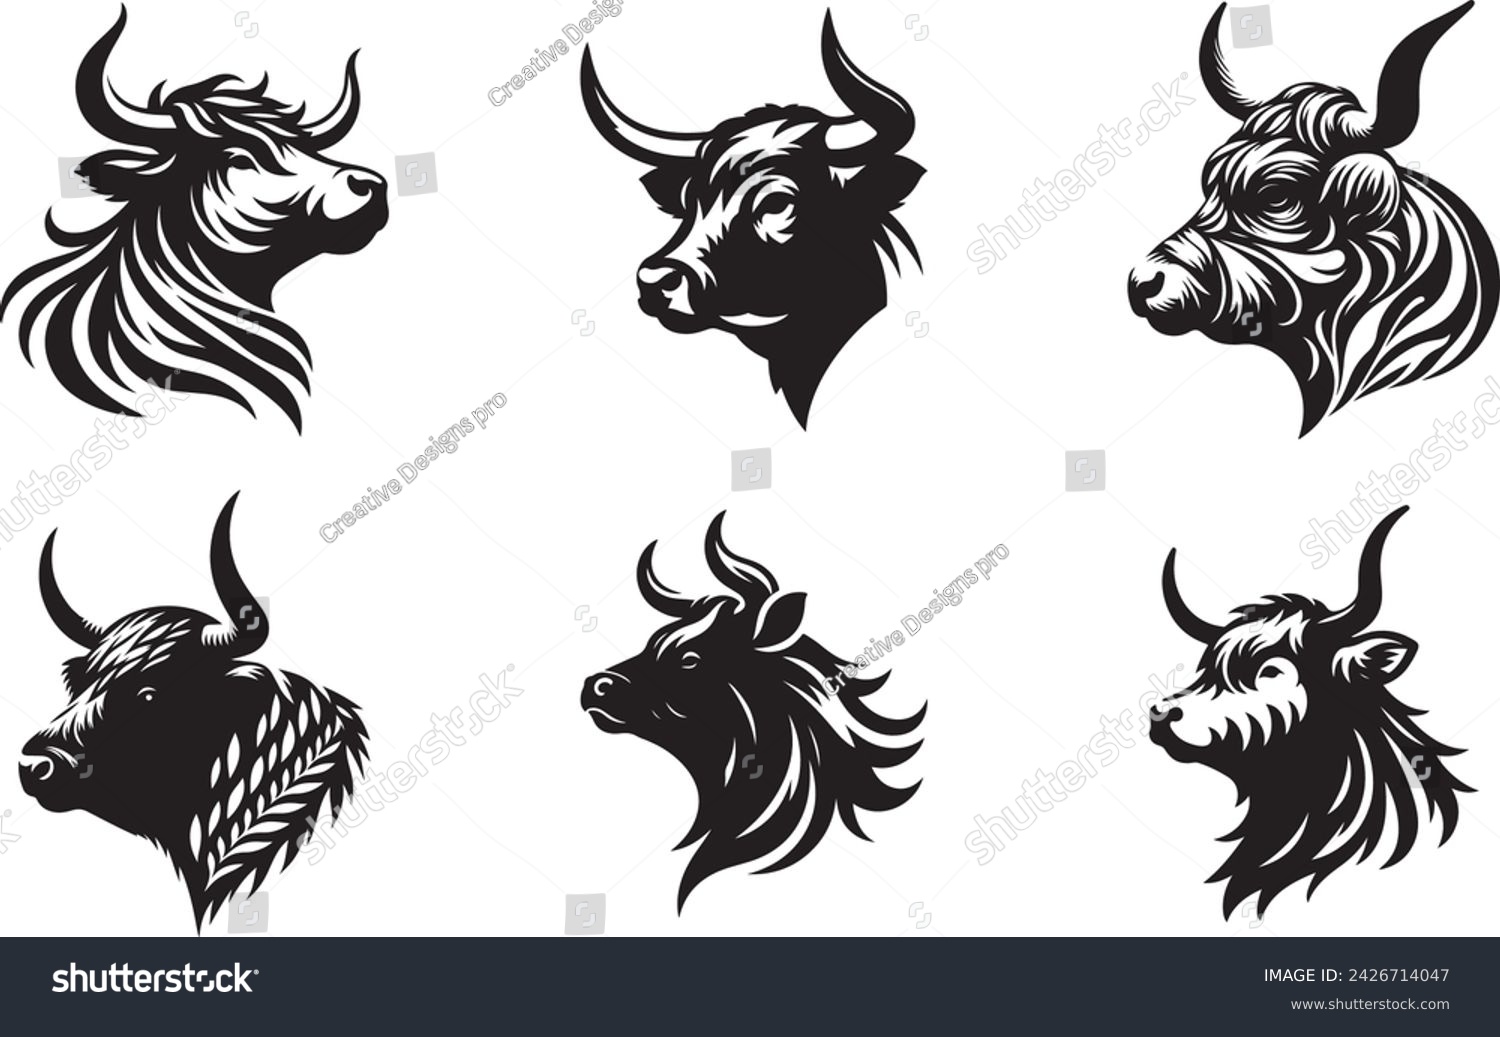 SVG of cow head vector illustration, p r i n t able svg